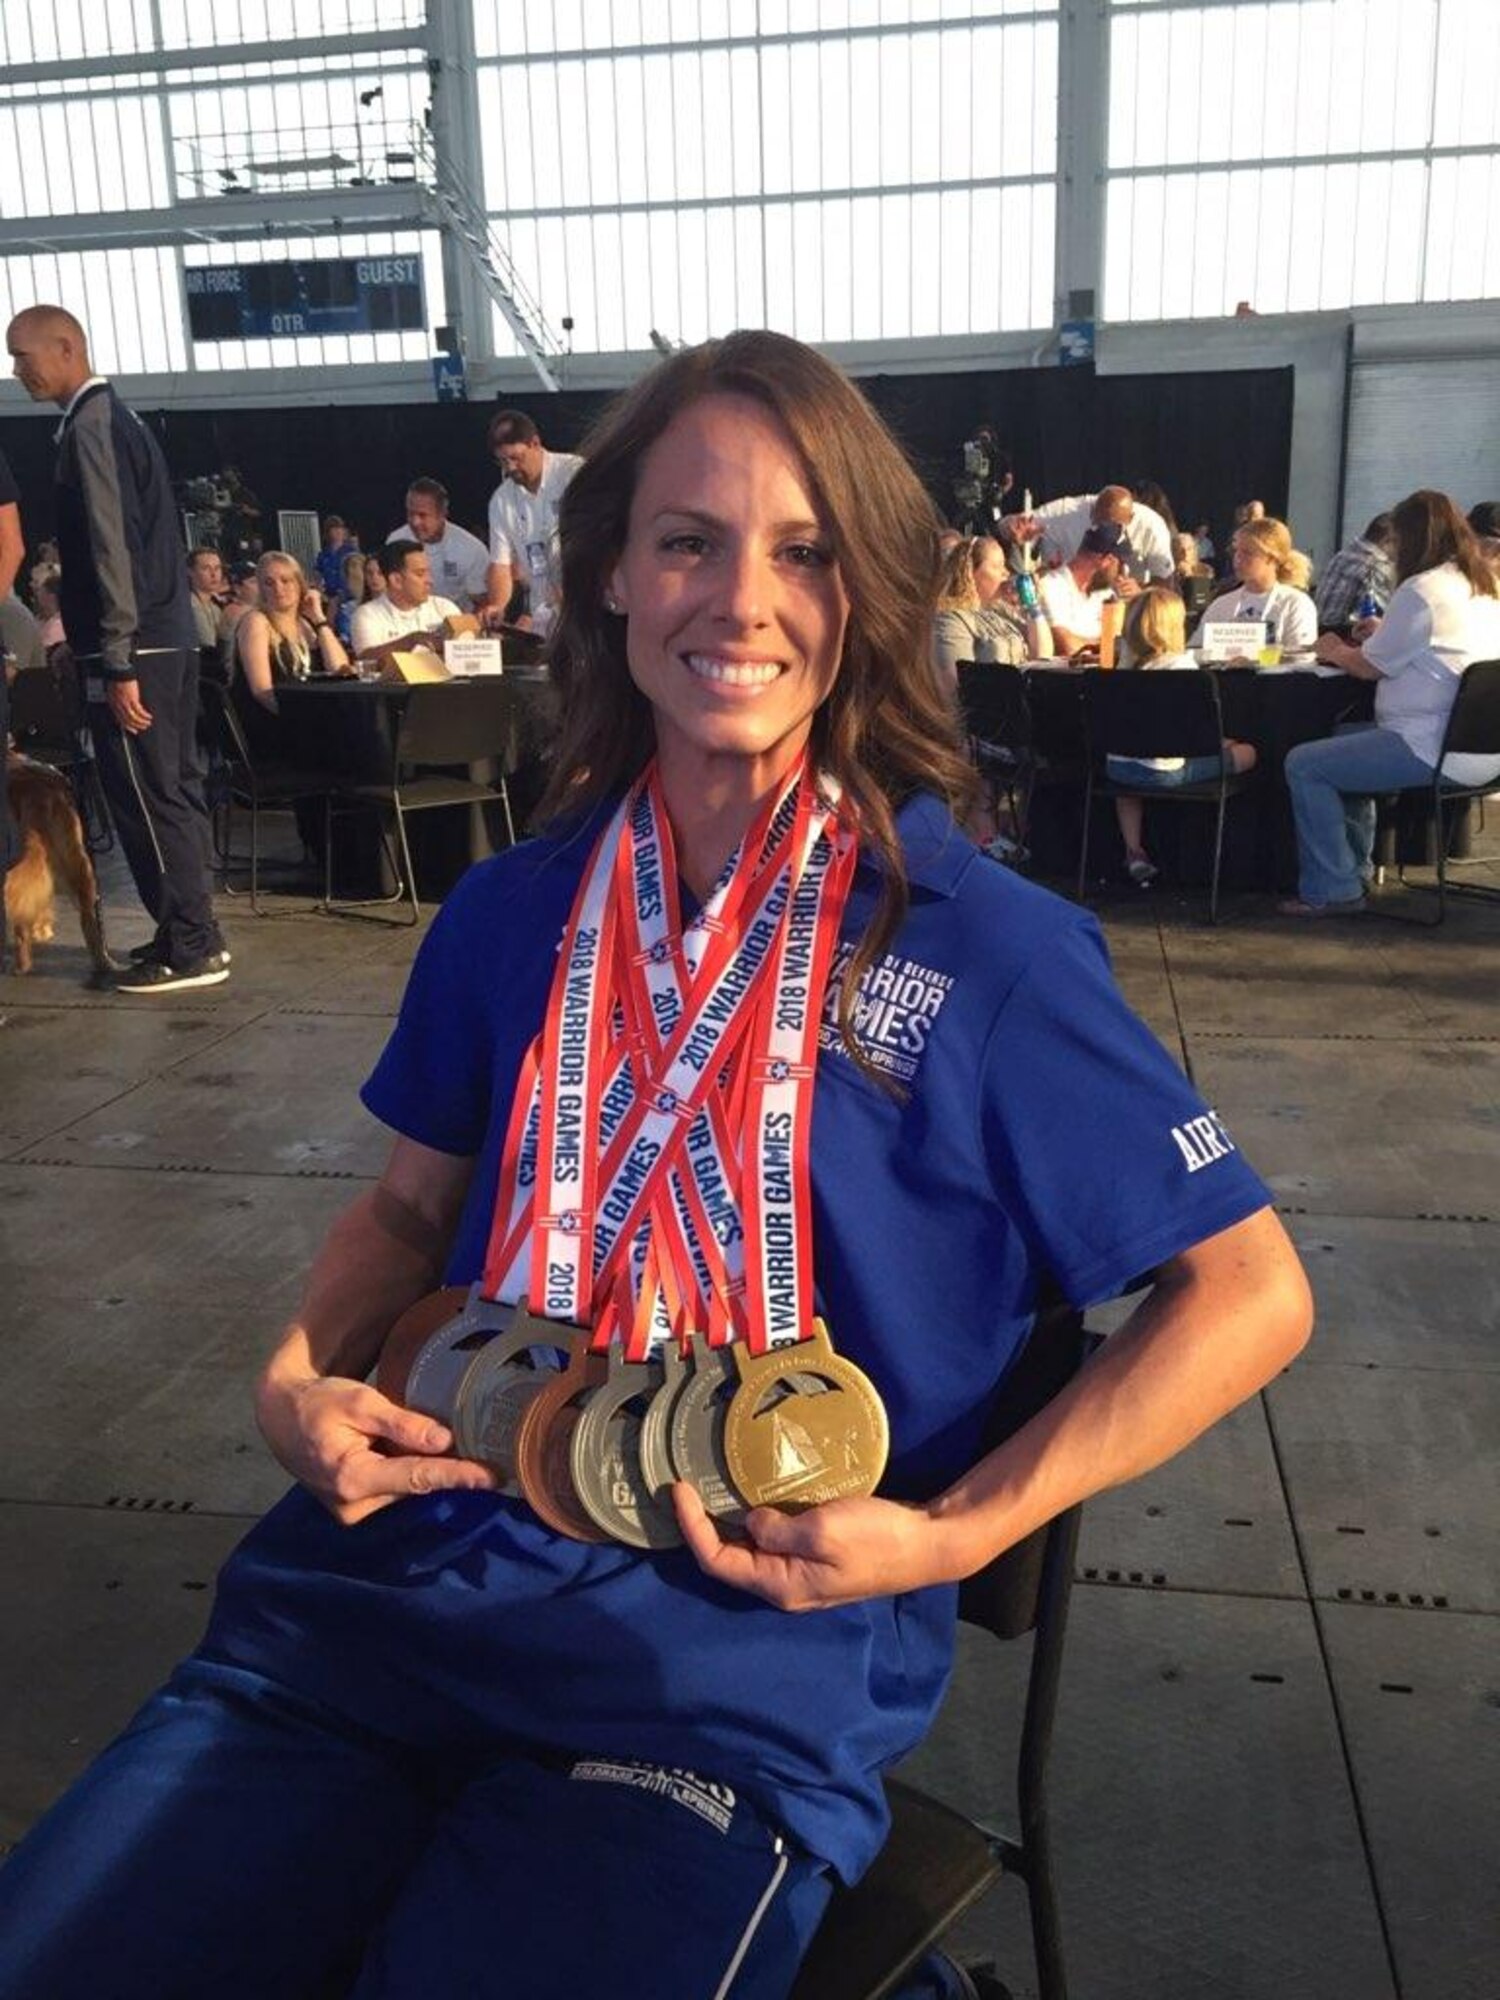 Smiling woman proudly displays gold, silver, and bronze medals around neck